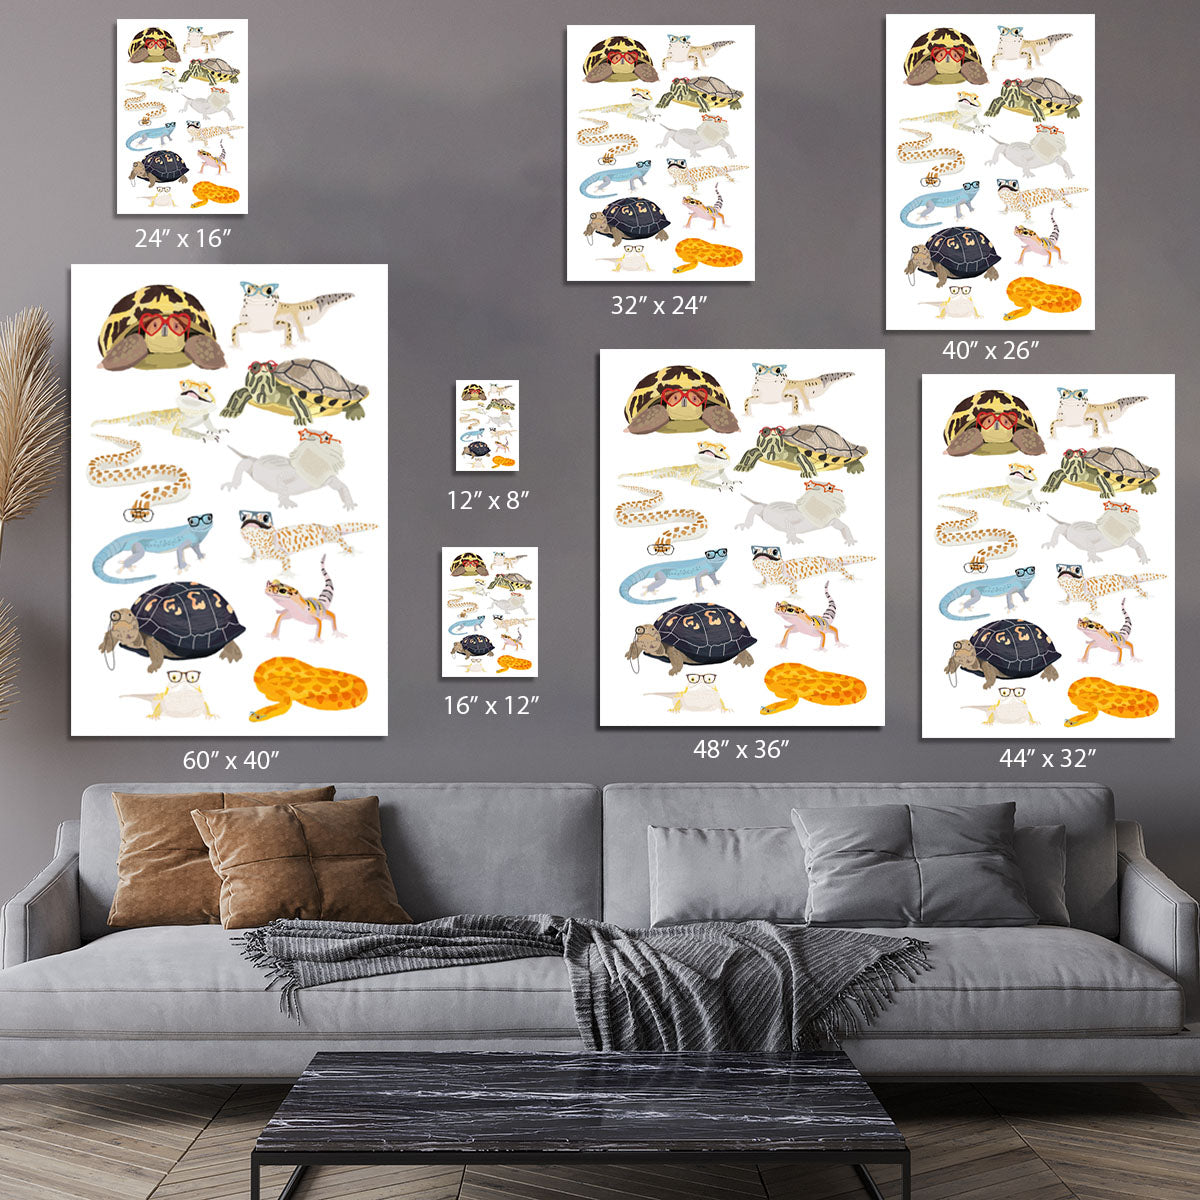 12 Reptiles In Glasses Canvas Print or Poster - 1x - 7